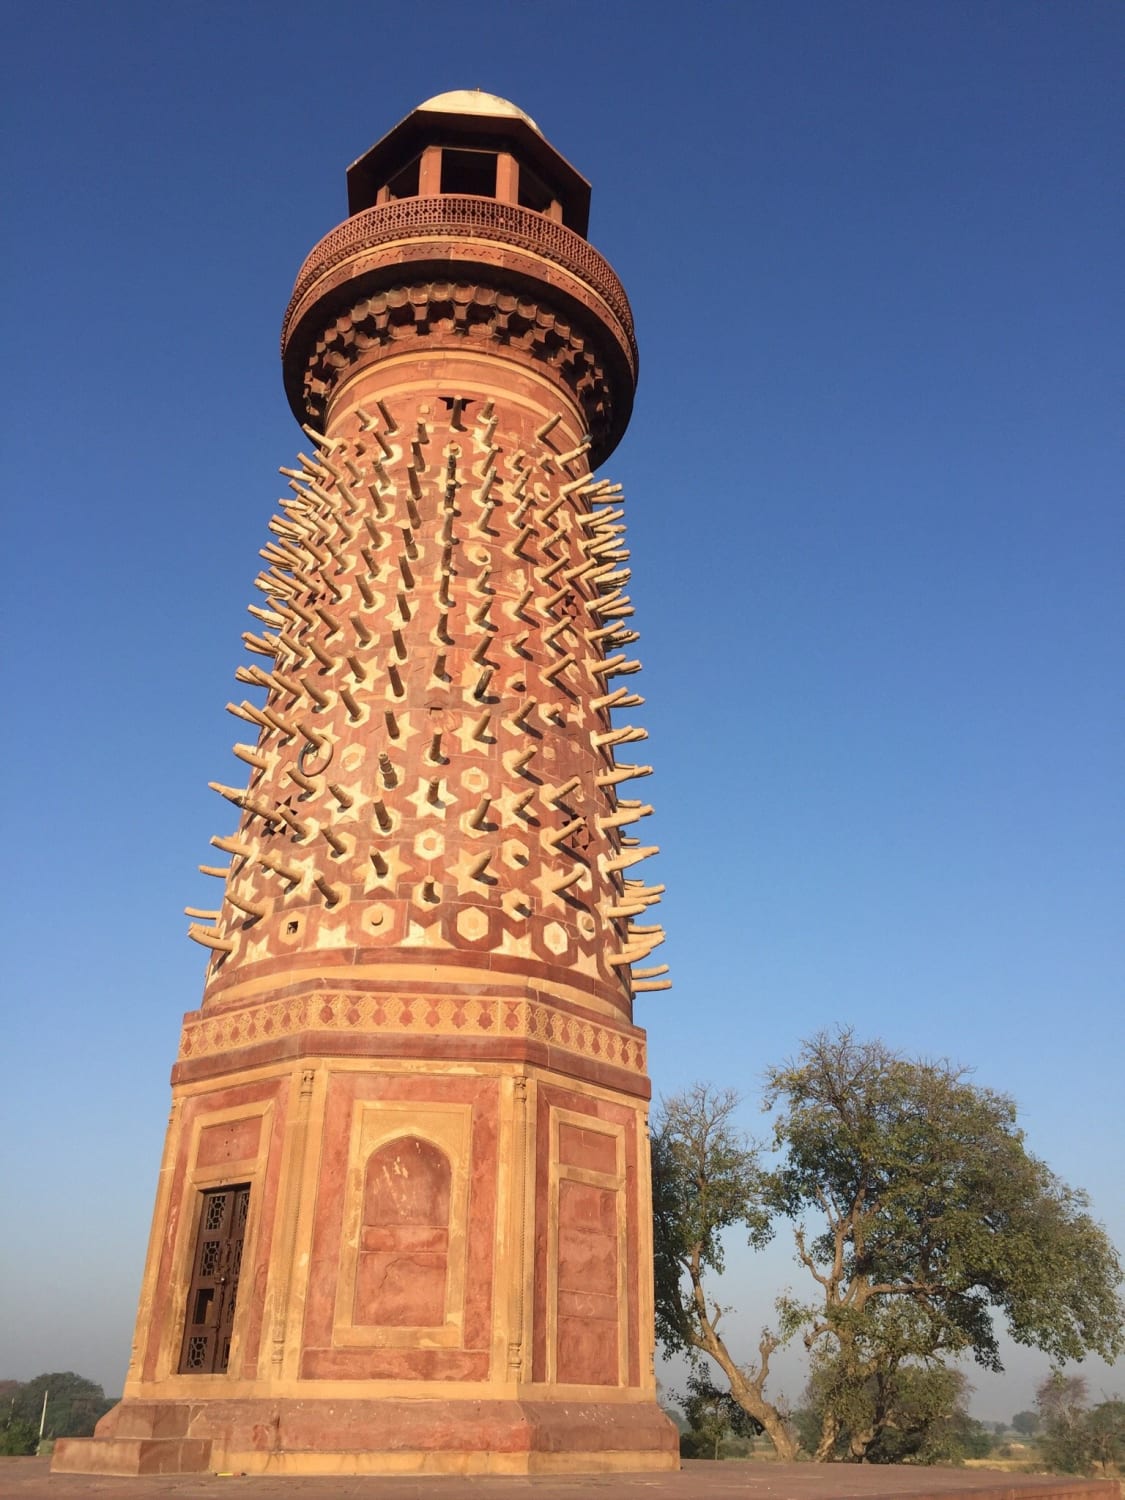 Hiran Minar or Ivory tower in Fatehpur Sikri near Agra in India. Traditionally it was thought to have been erected as a memorial to the Emperor Akbar's favourite elephant. However, it was probably a used as a starting point for subsequent mile posts.